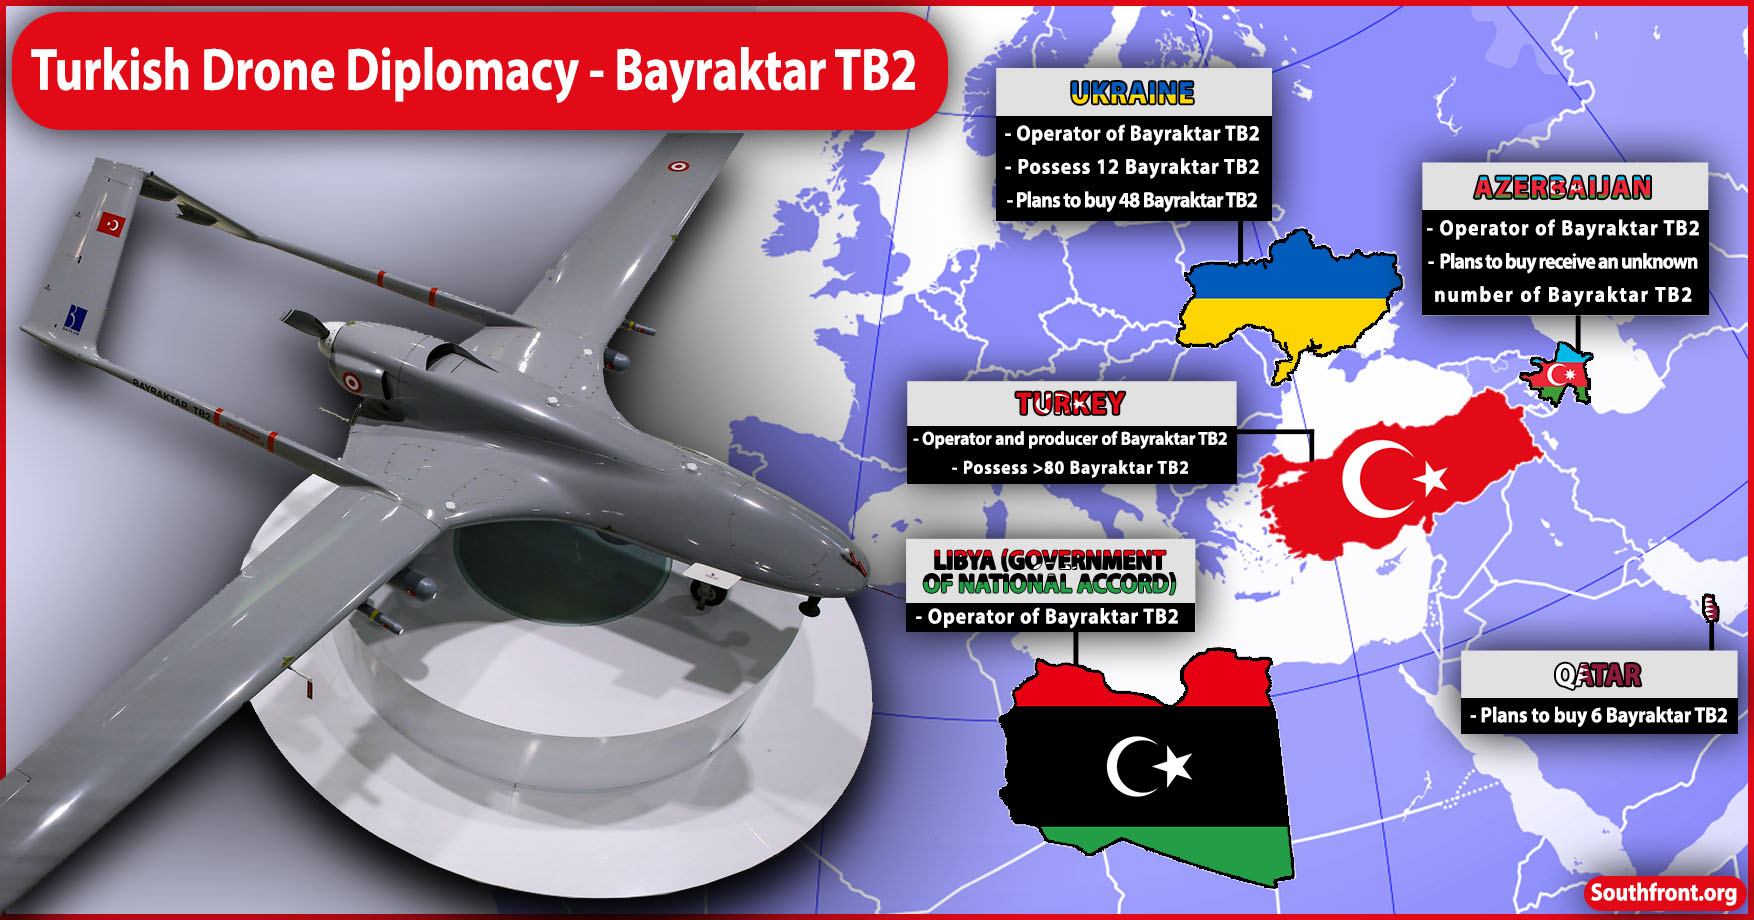 Ukraine Is Key "Blood Donor" For Turkish Military Industry